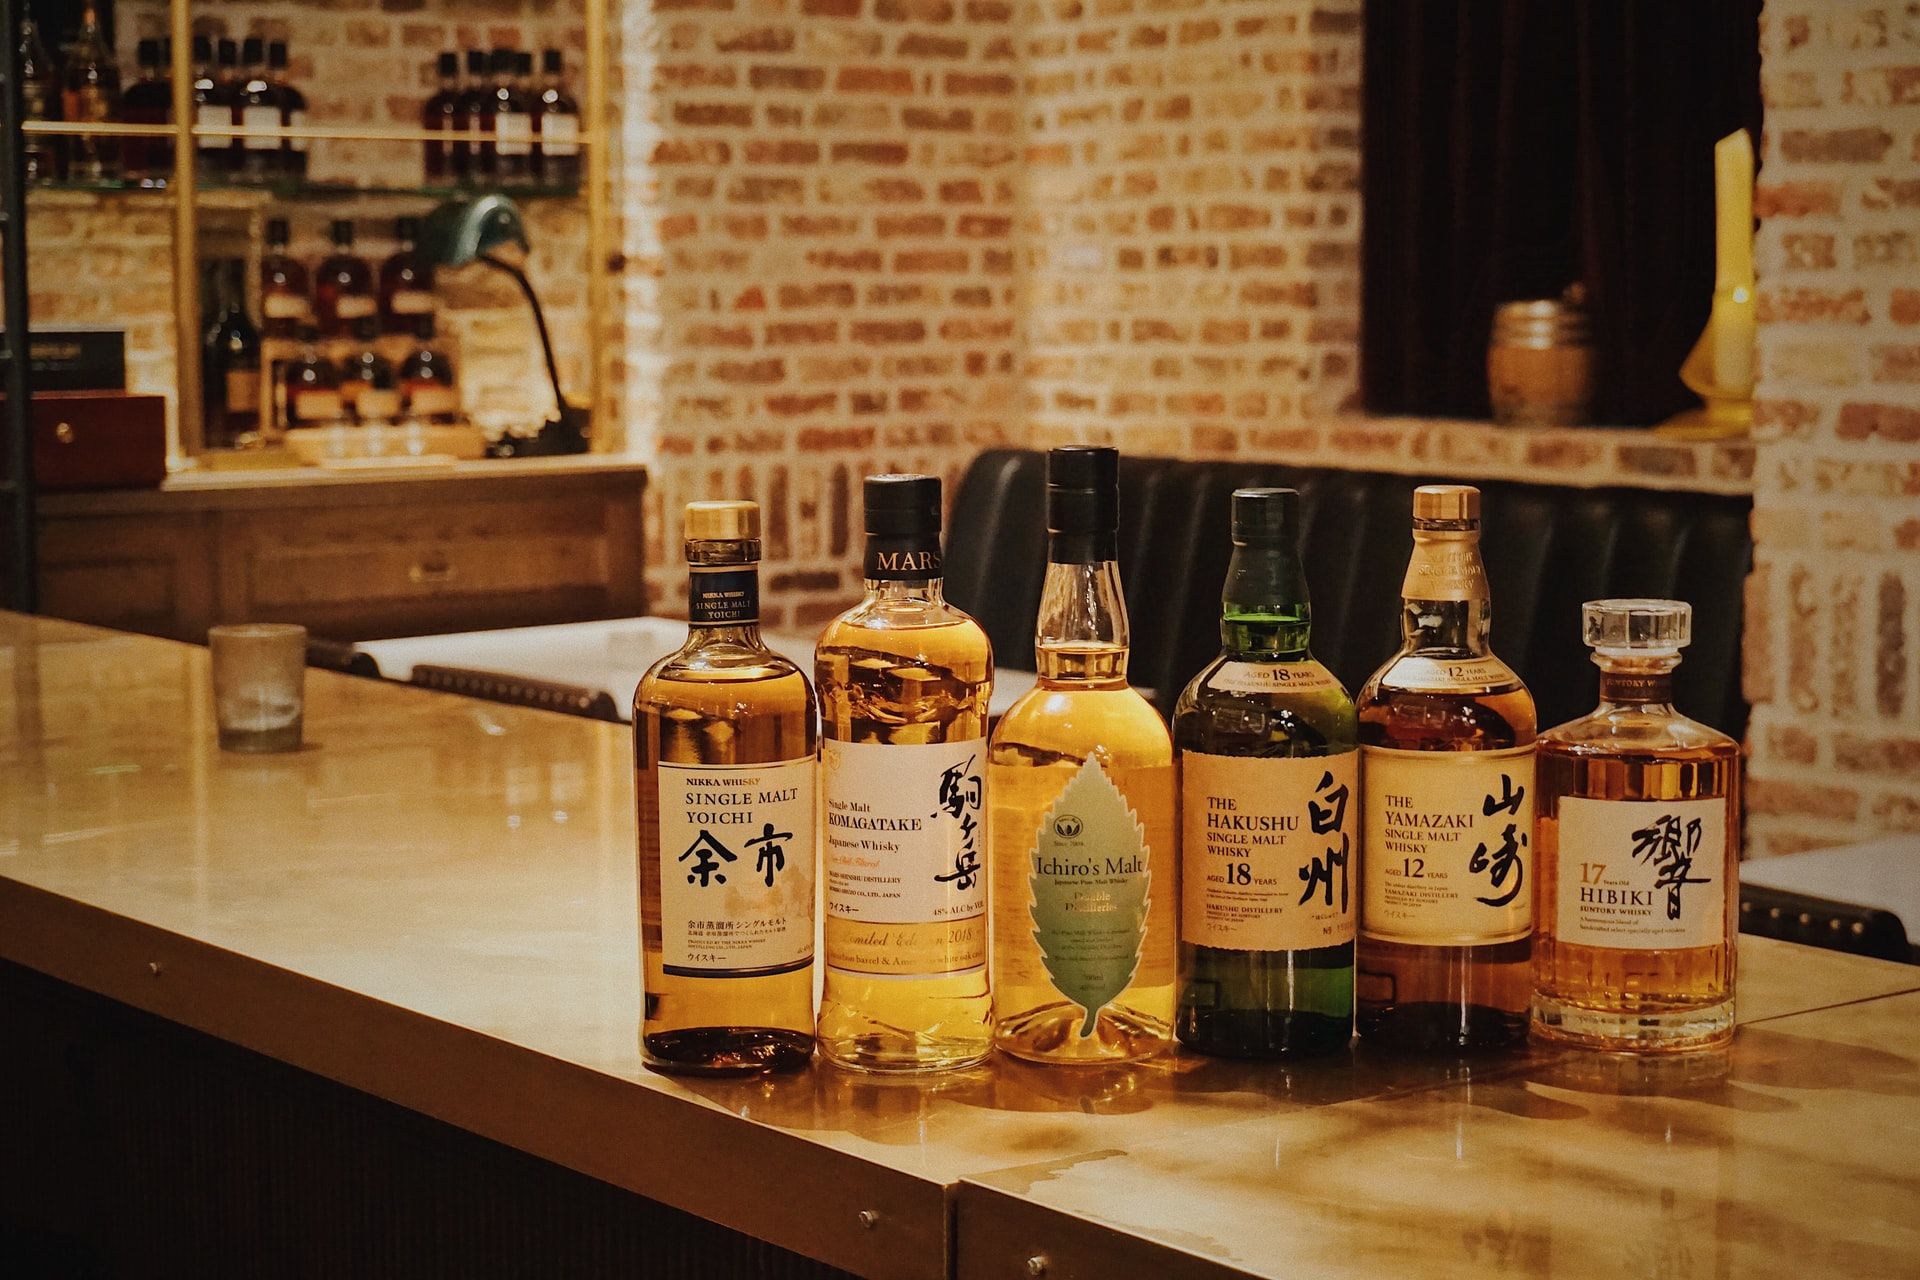 What's in a name? The story of Japanese whisky